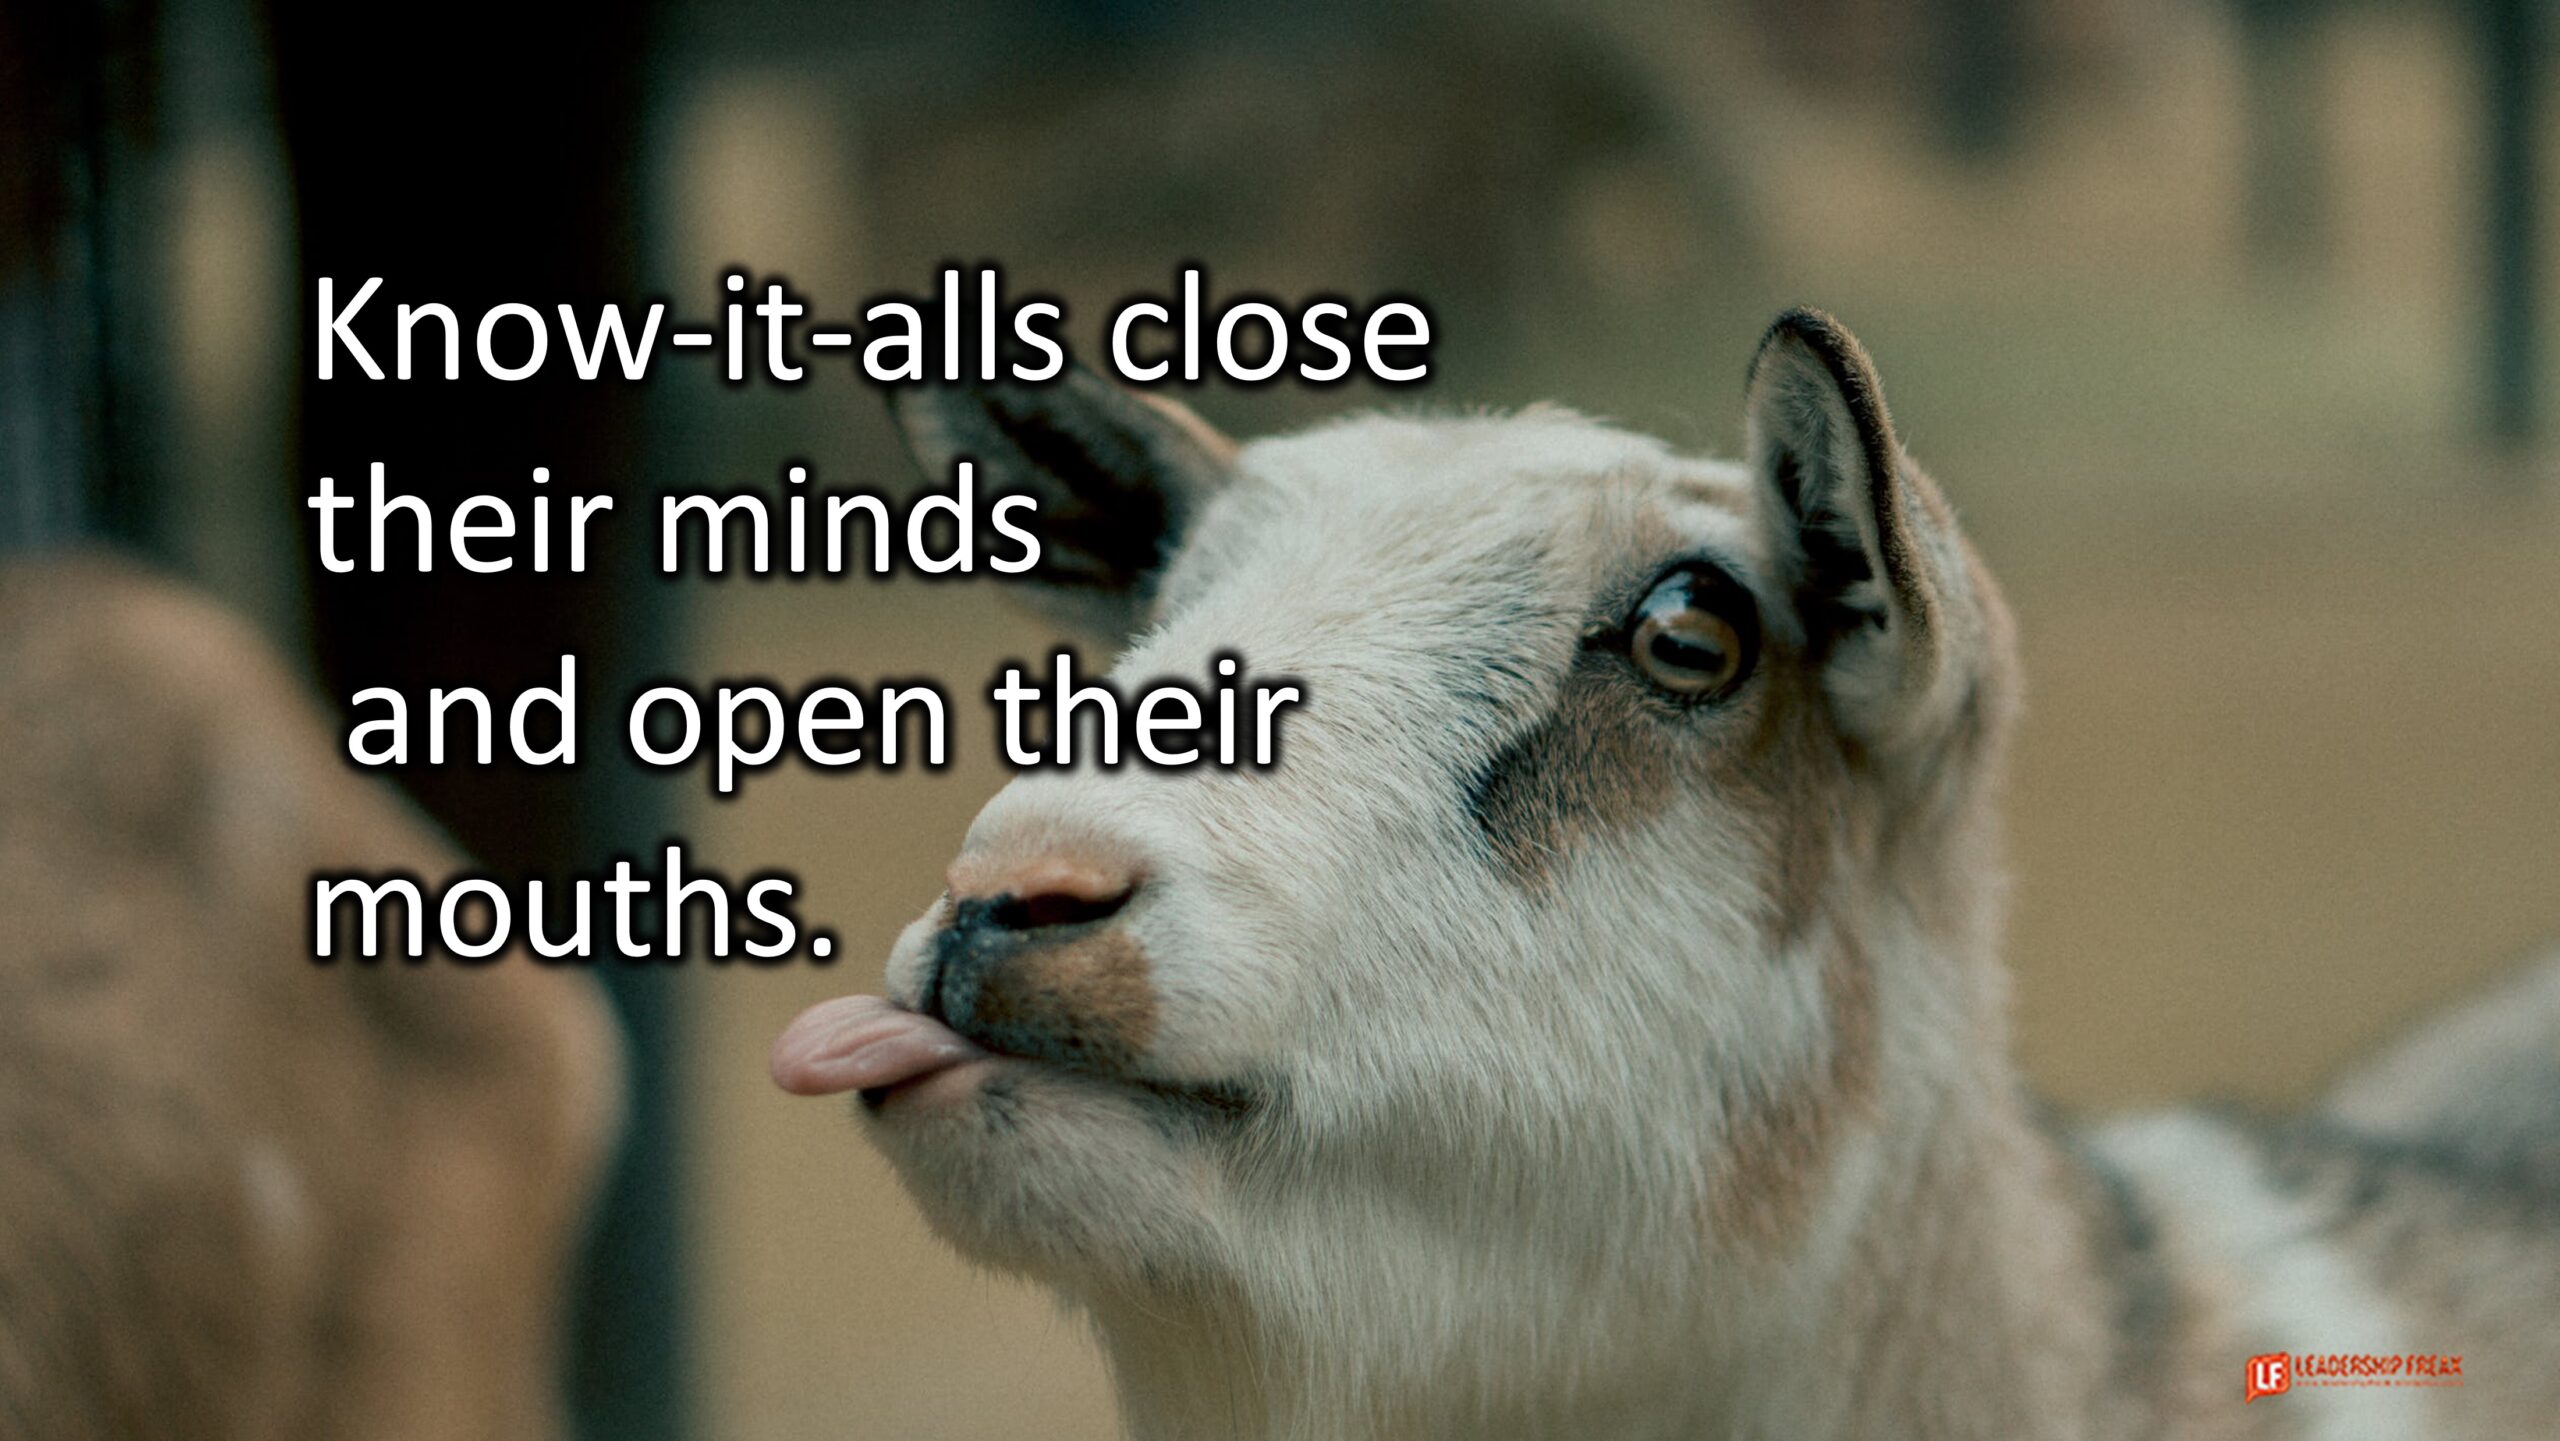 Know-it-alls close their minds and open their mouths